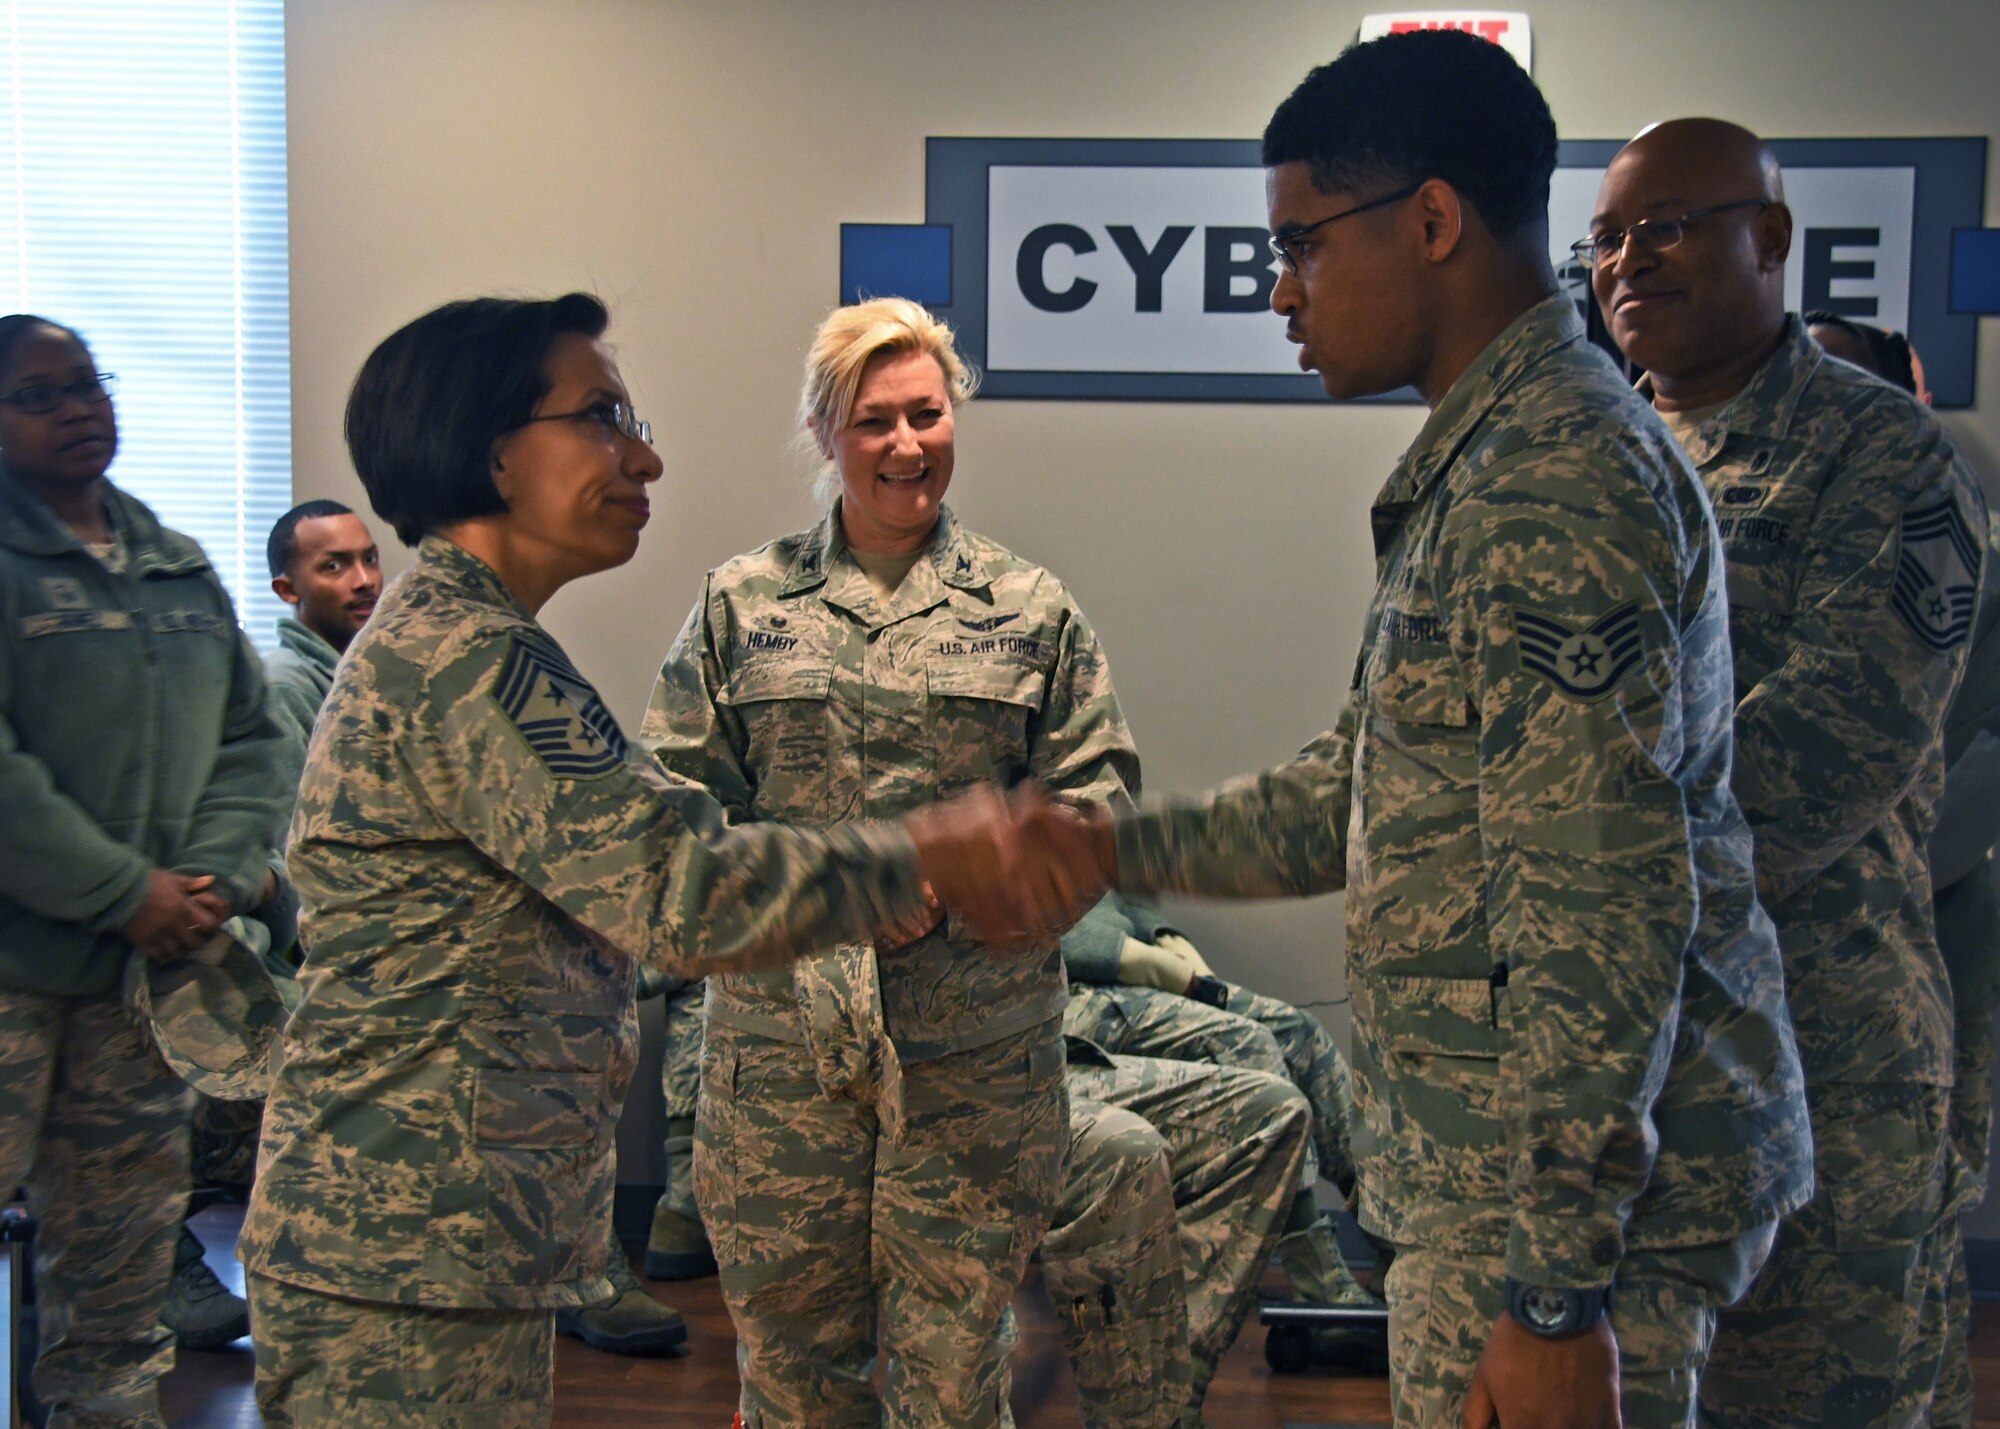 Chief Master Sgt. Ericka Kelly, Air Force Reserve Command command chief master sergeant, presents a coin to a non-commissioned officer from the 94th Aeromedical Staging Squadron  at Dobbins Air Reserve Base, Ga., Jan. 7, 2018. Kelly presented him with a coin for his outstanding achievements at the 94th ASTS. (U.S. Air Force photo by Staff Sergeant Miles Wilson)